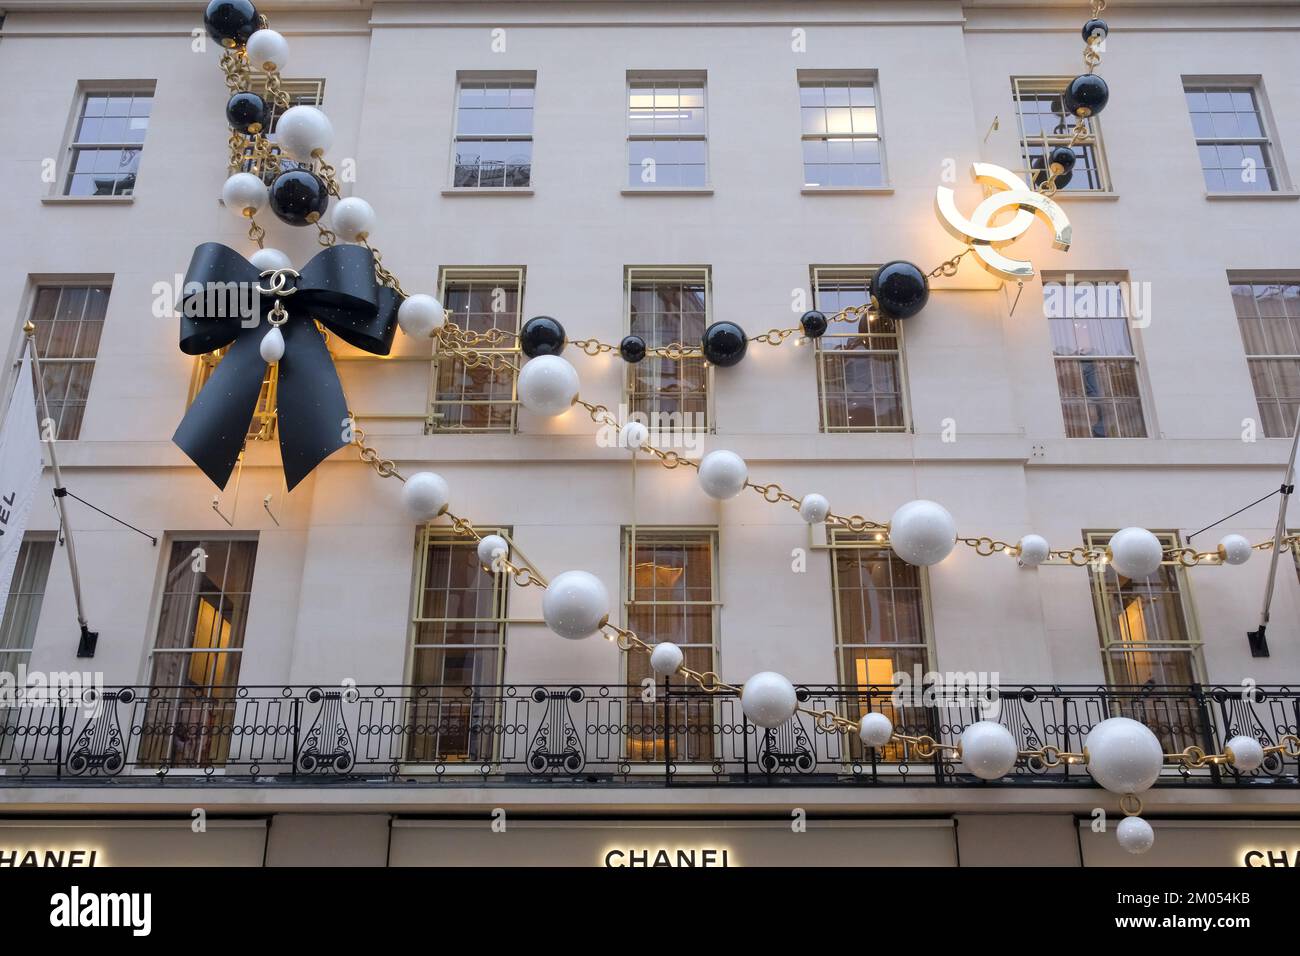 The decorated Christmas shop windows of Chanel on Bond Street on